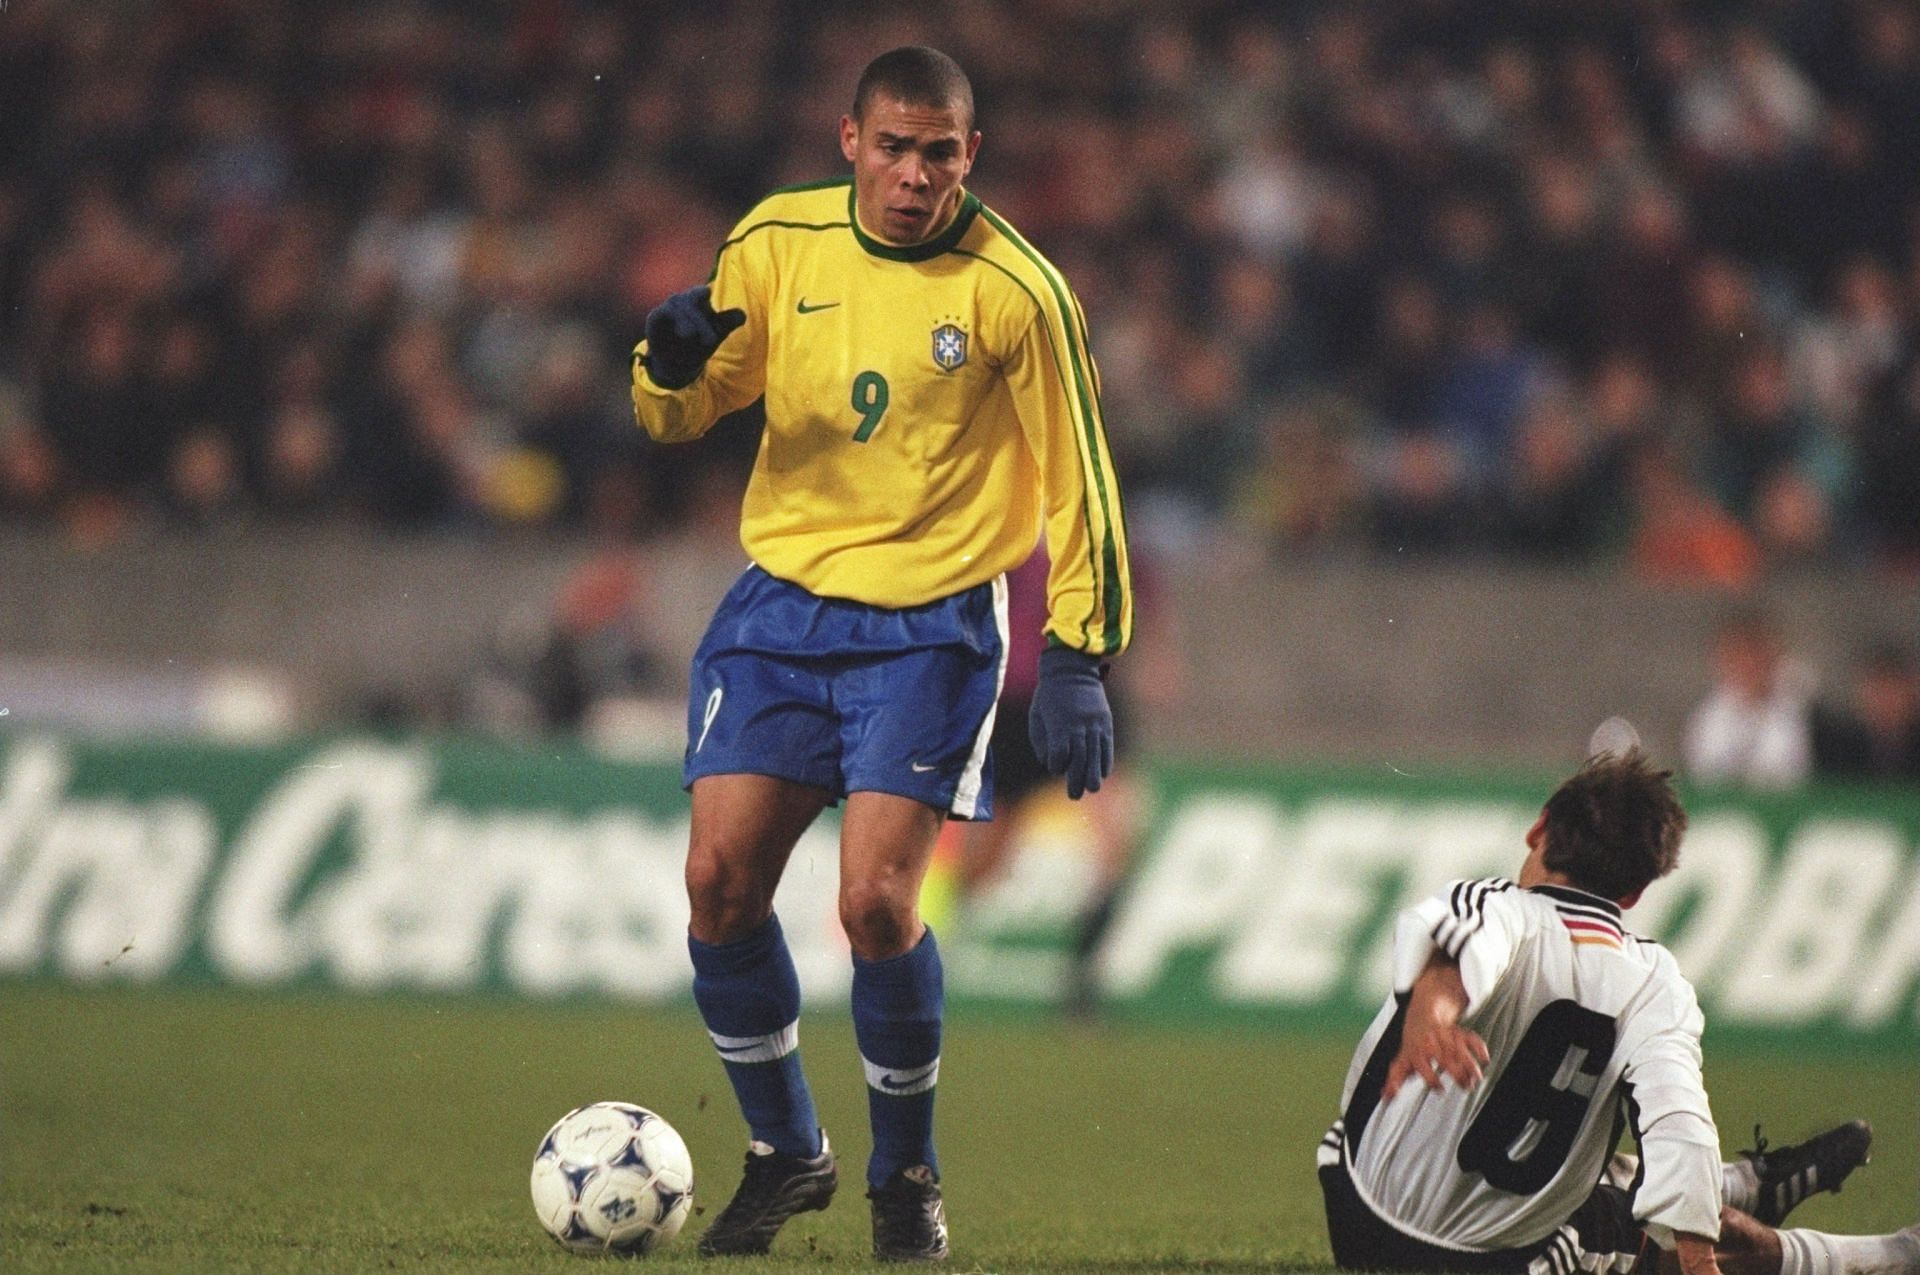 Ronaldo of Brazil and Olaf Thon of Germany in action